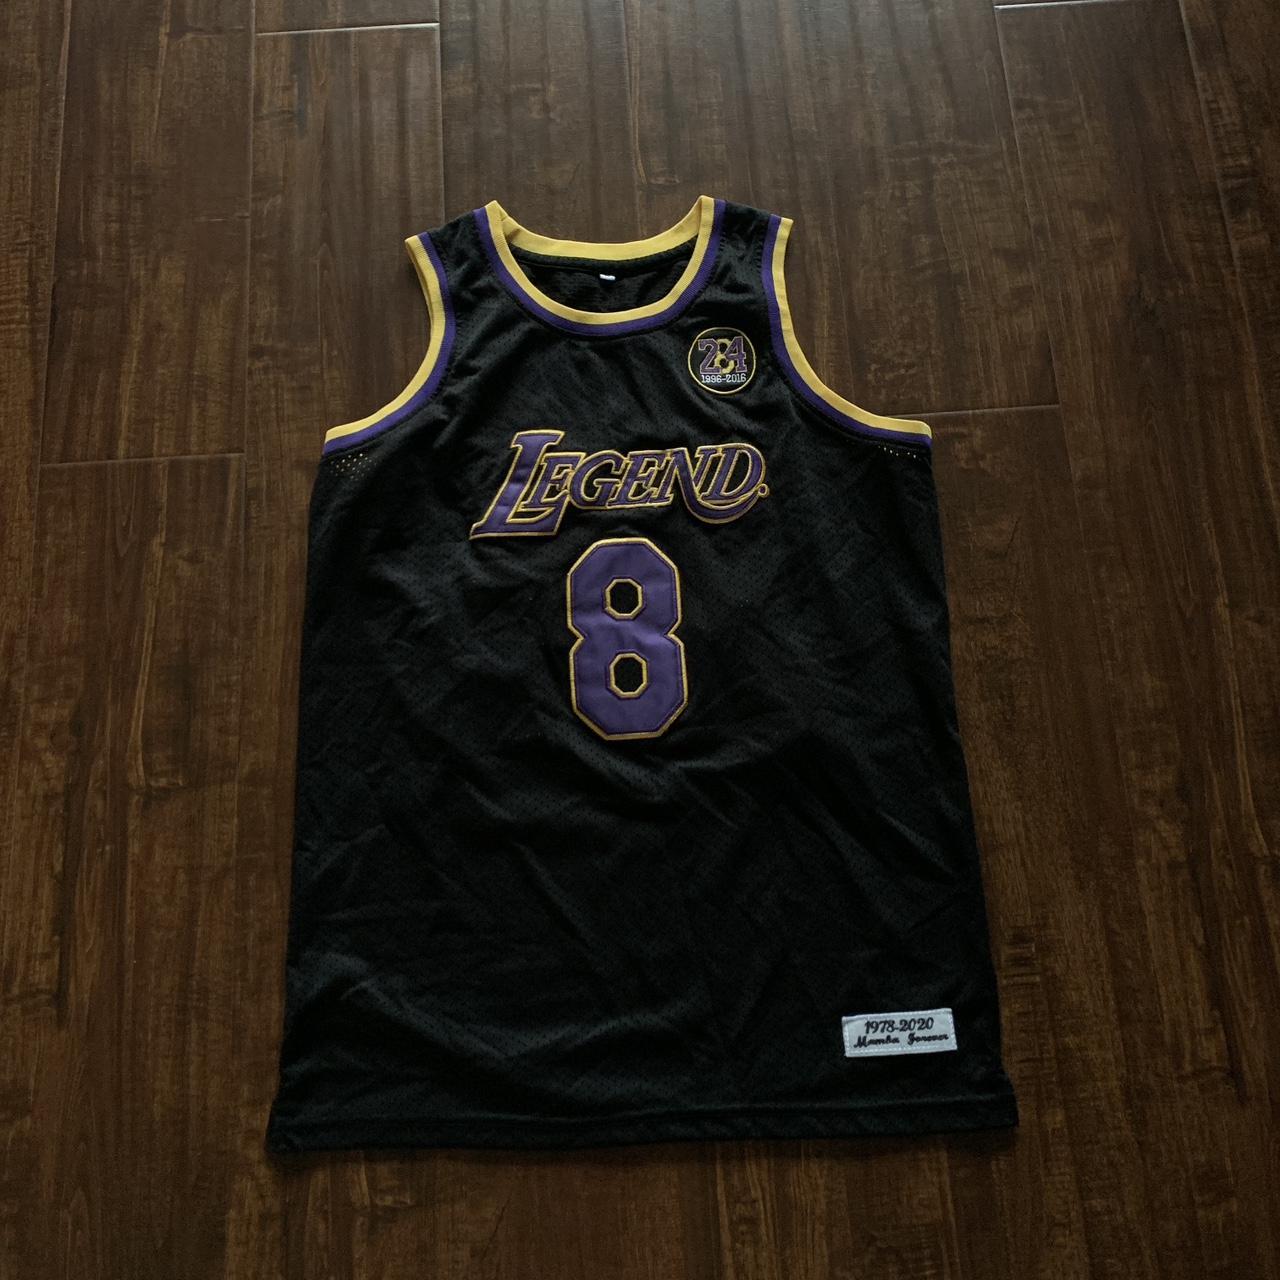 Kobe Bryant legend forever jersey Size M 28' top to - Depop